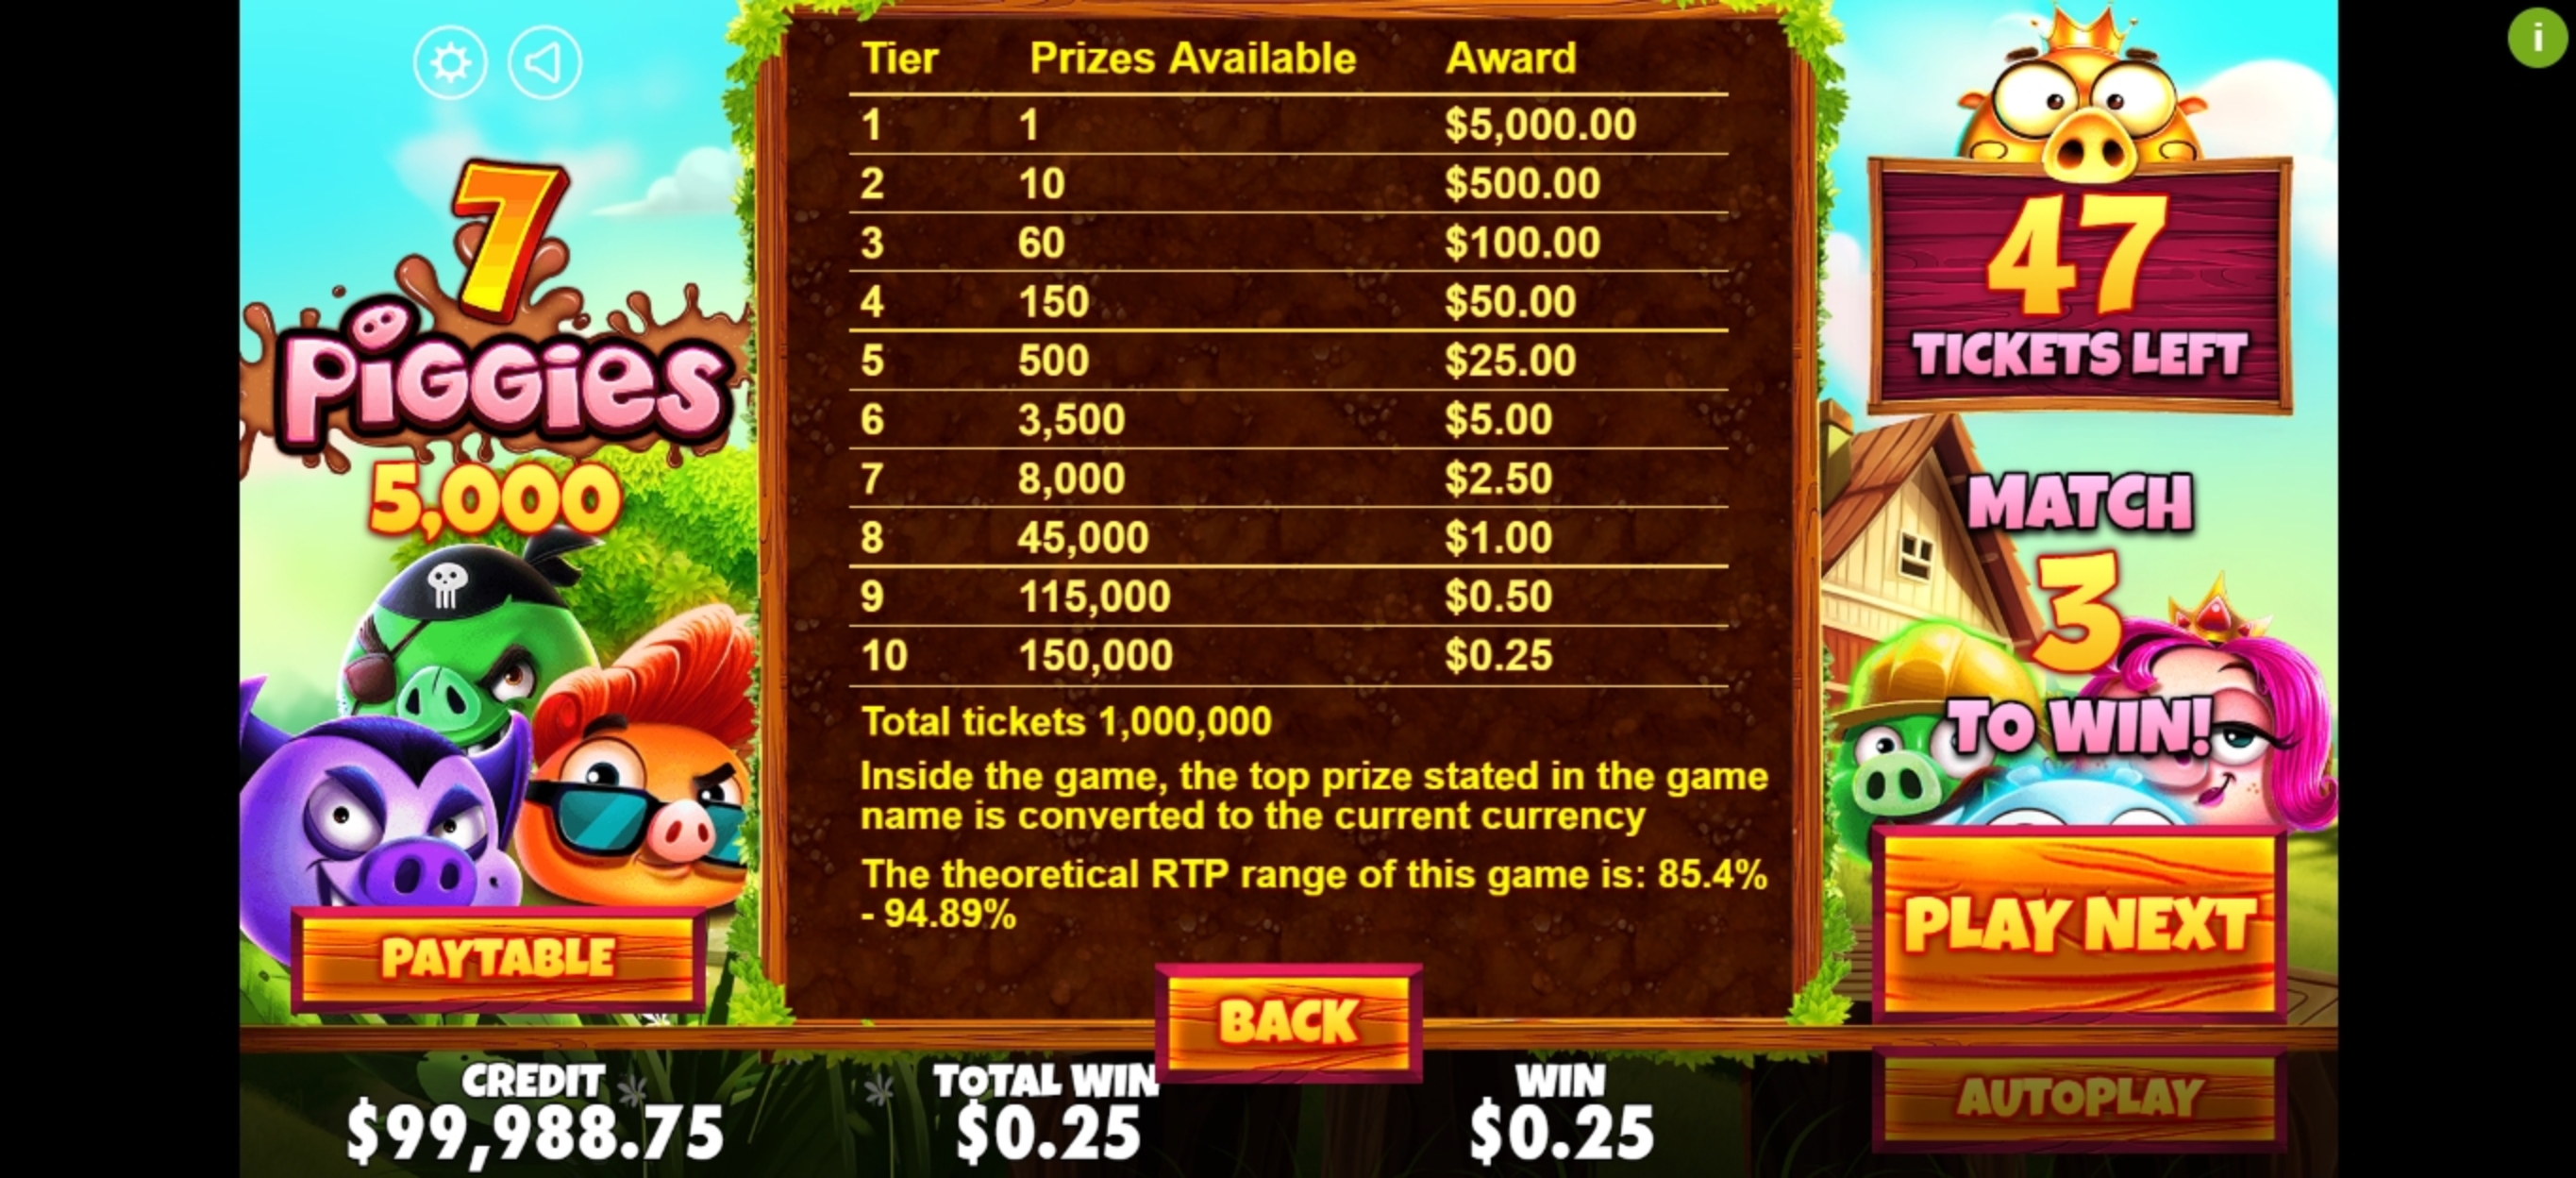 Info of 7 Piggies Scratchcard Slot Game by Pragmatic Play